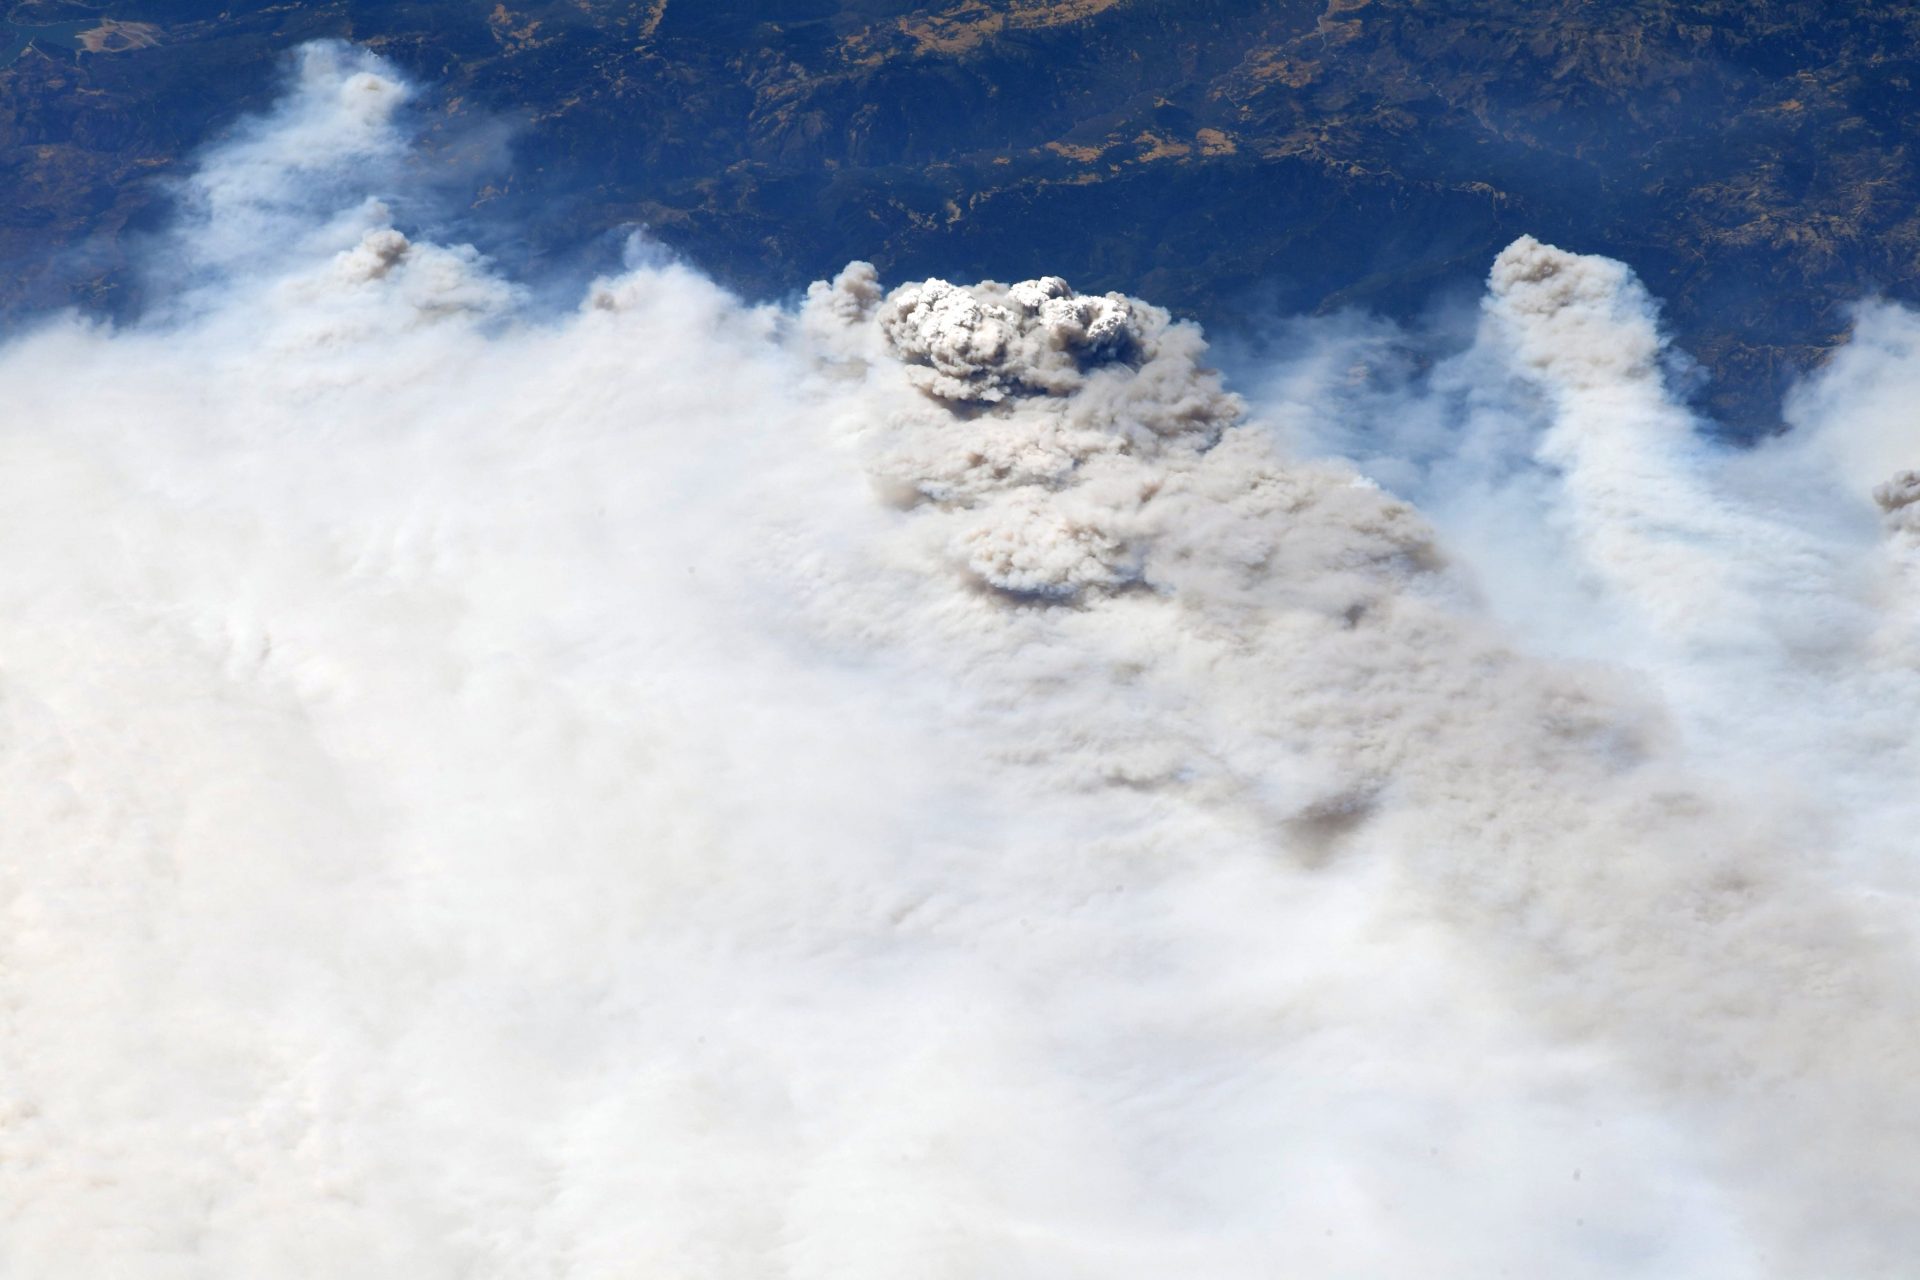 Astronaut spots California wildfires from residence, sends ‘thoughts and prayers’ to victims